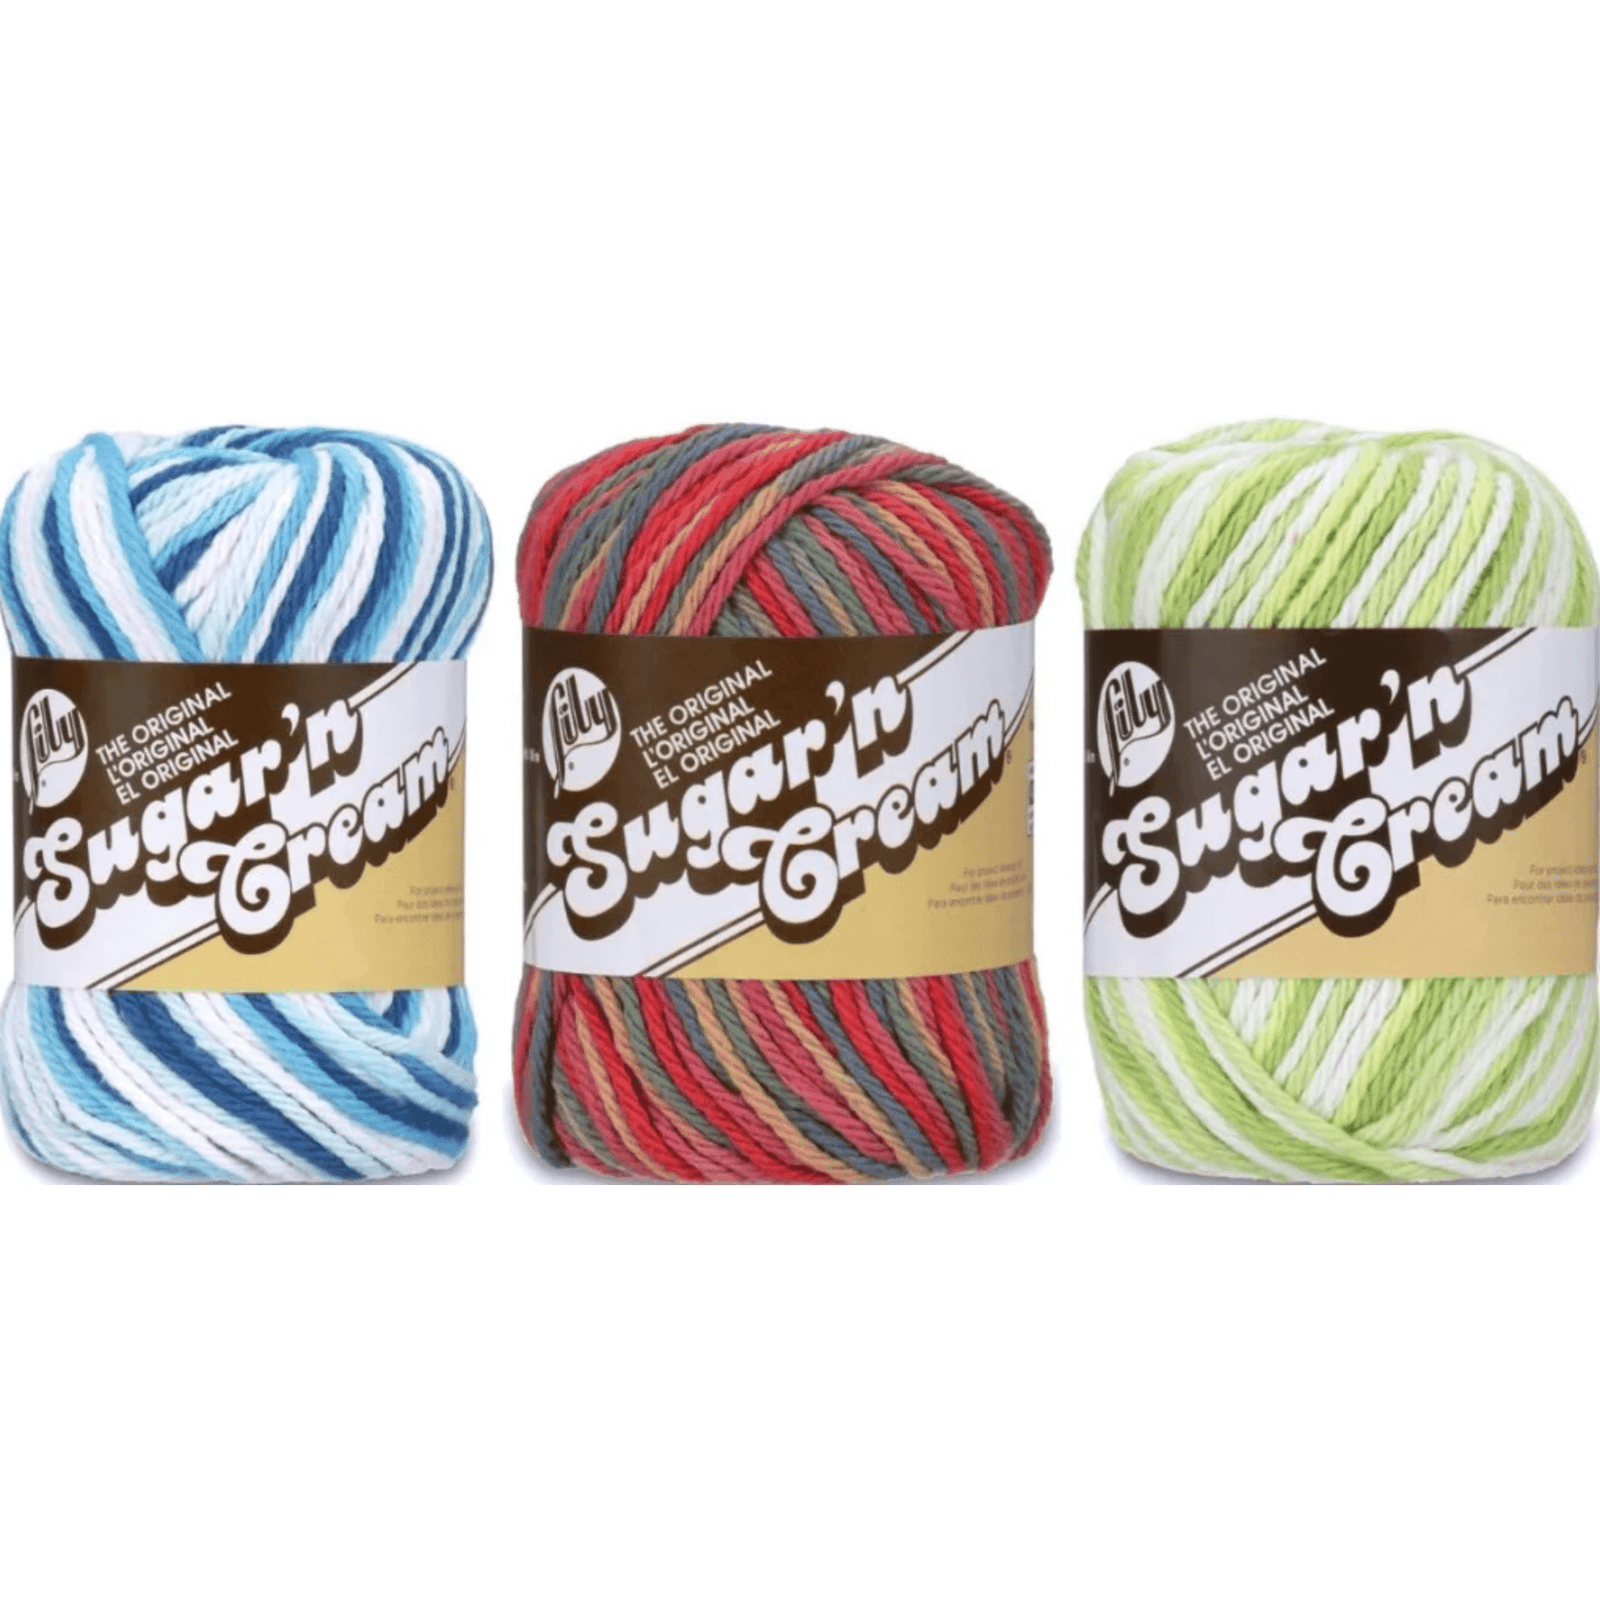 Lily Sugar'n Cream Super Size Ombres Yarn, Over The Rainbow